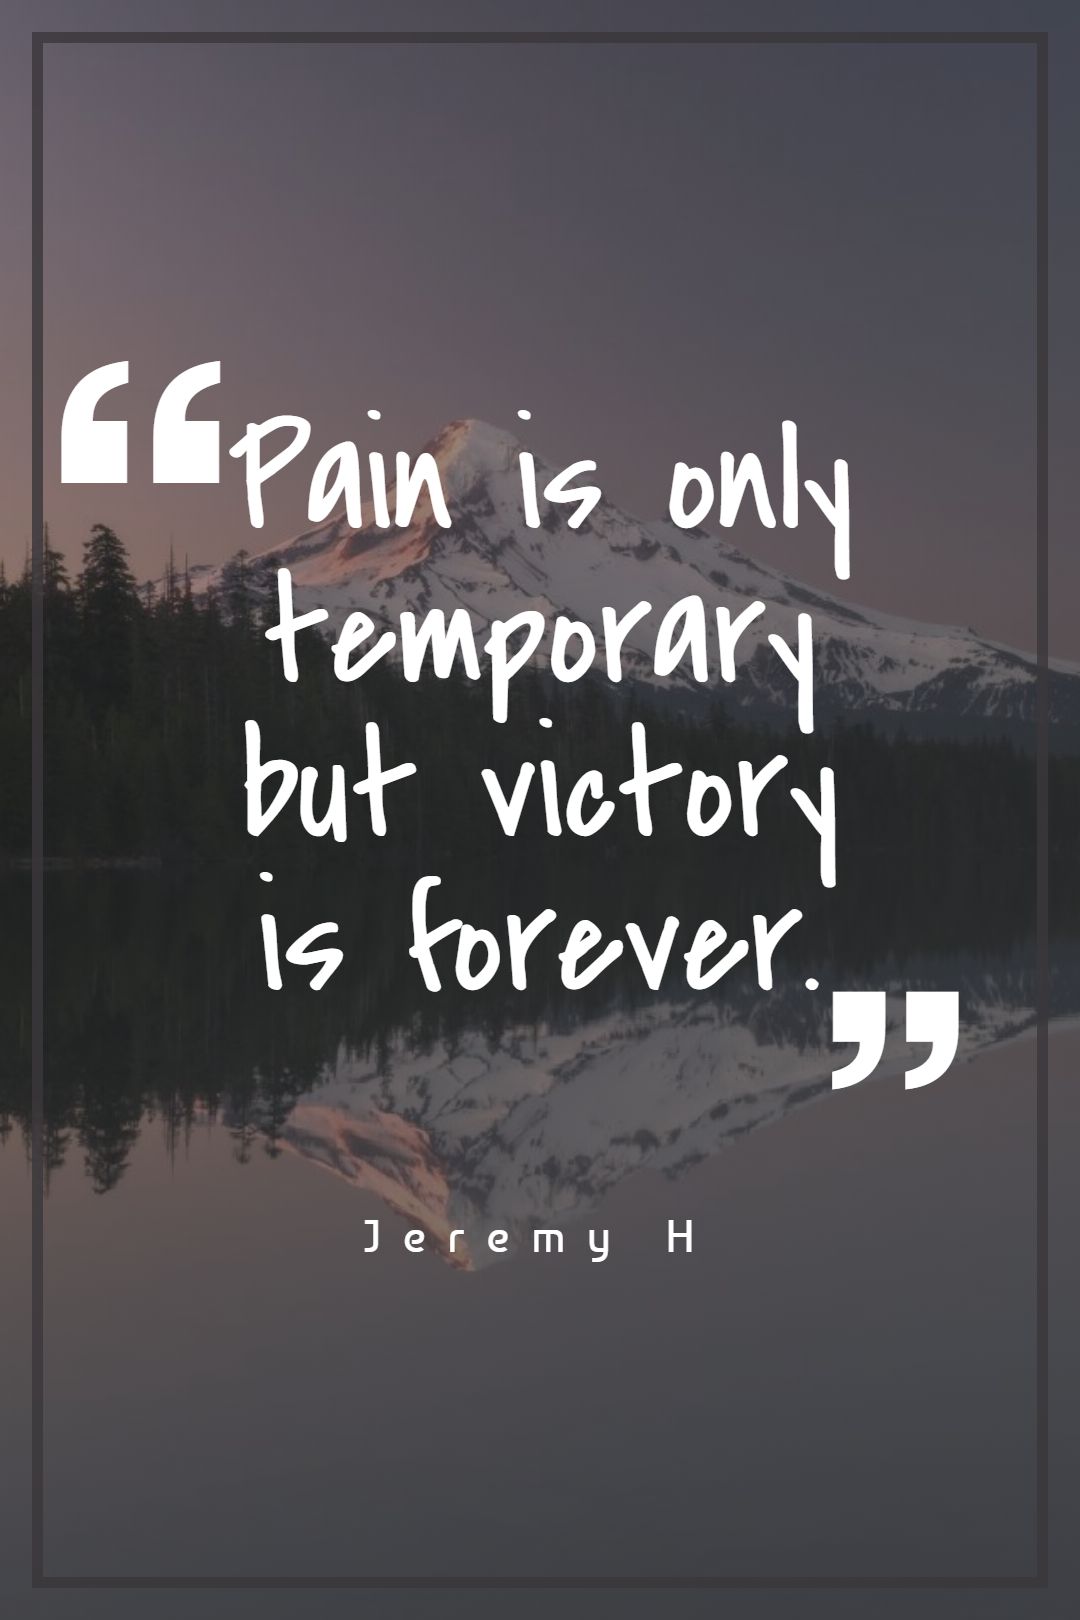 Pain is only temporary but victory is forever.